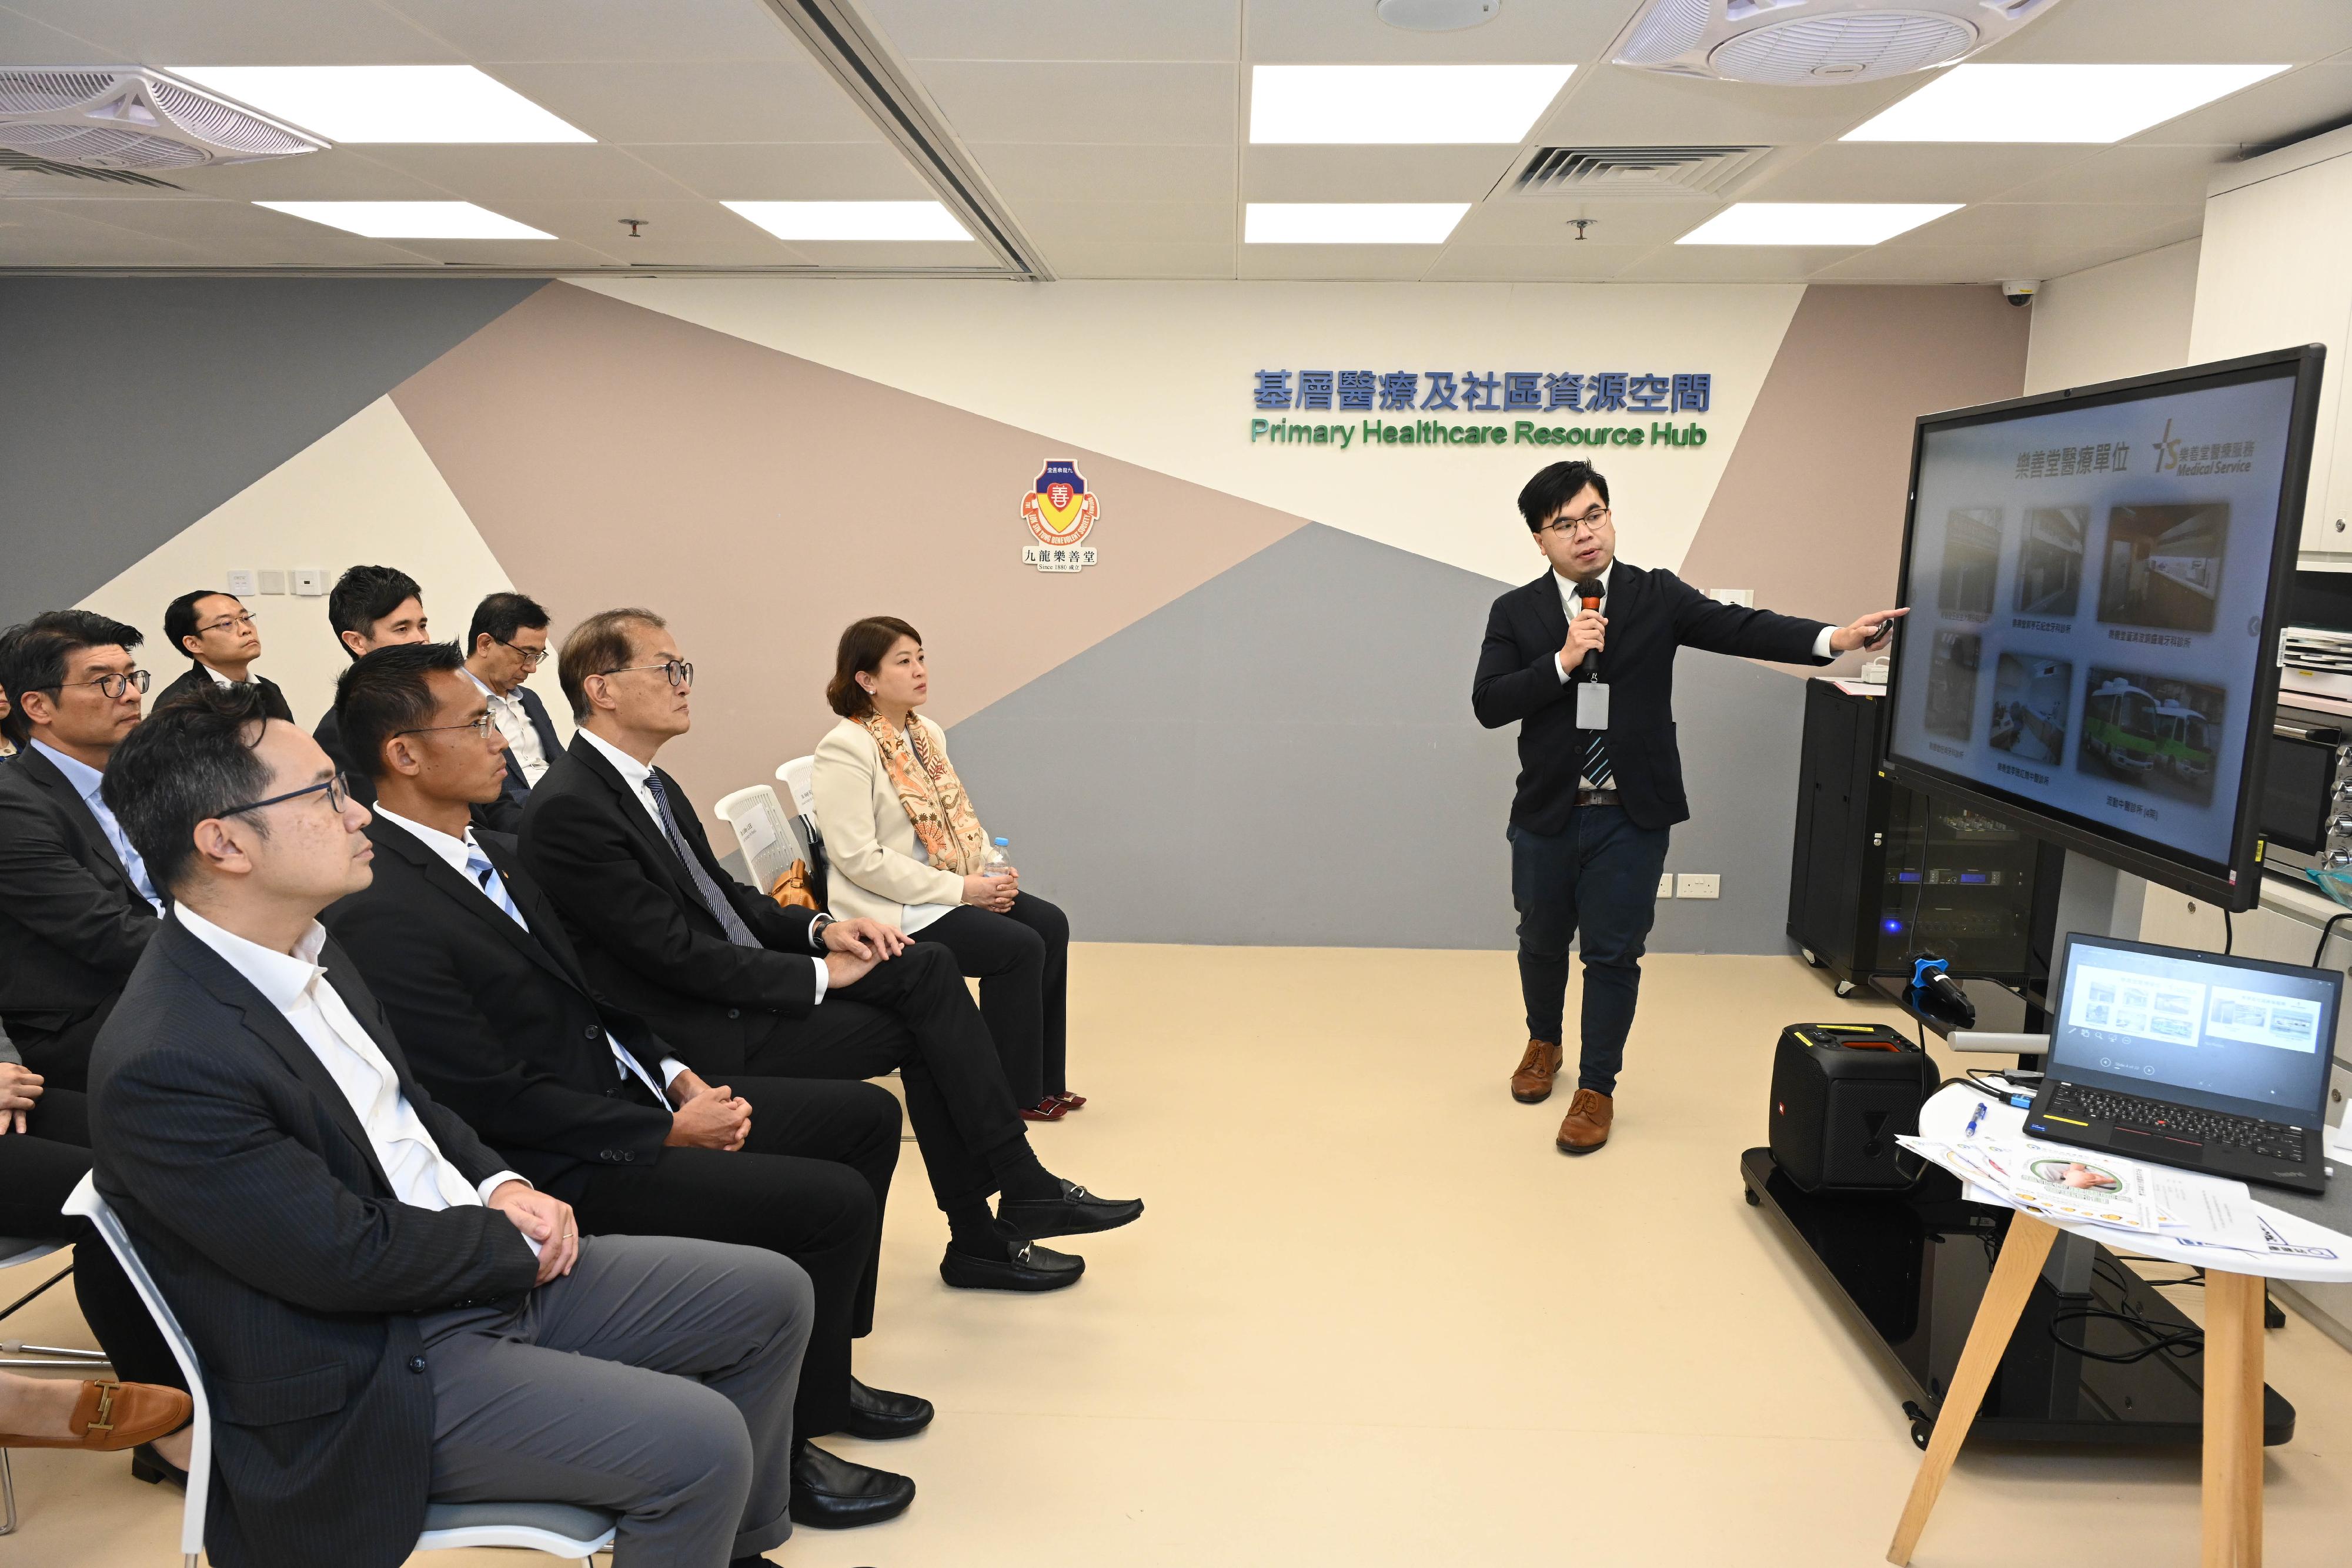 The Secretary for Health, Professor Lo Chung-mau (front row, third left), and the Under Secretary for Health, Dr Libby Lee (front row, fourth left), accompanied by the Commissioner for Primary Healthcare, Dr Pang Fei-chau (back row, first left), visited Yau Tsim Mong District Health Centre (DHC) Express this afternoon (April 4) and listened to the staff sharing the DHC Express’ experience in providing primary healthcare services to members of the public. 